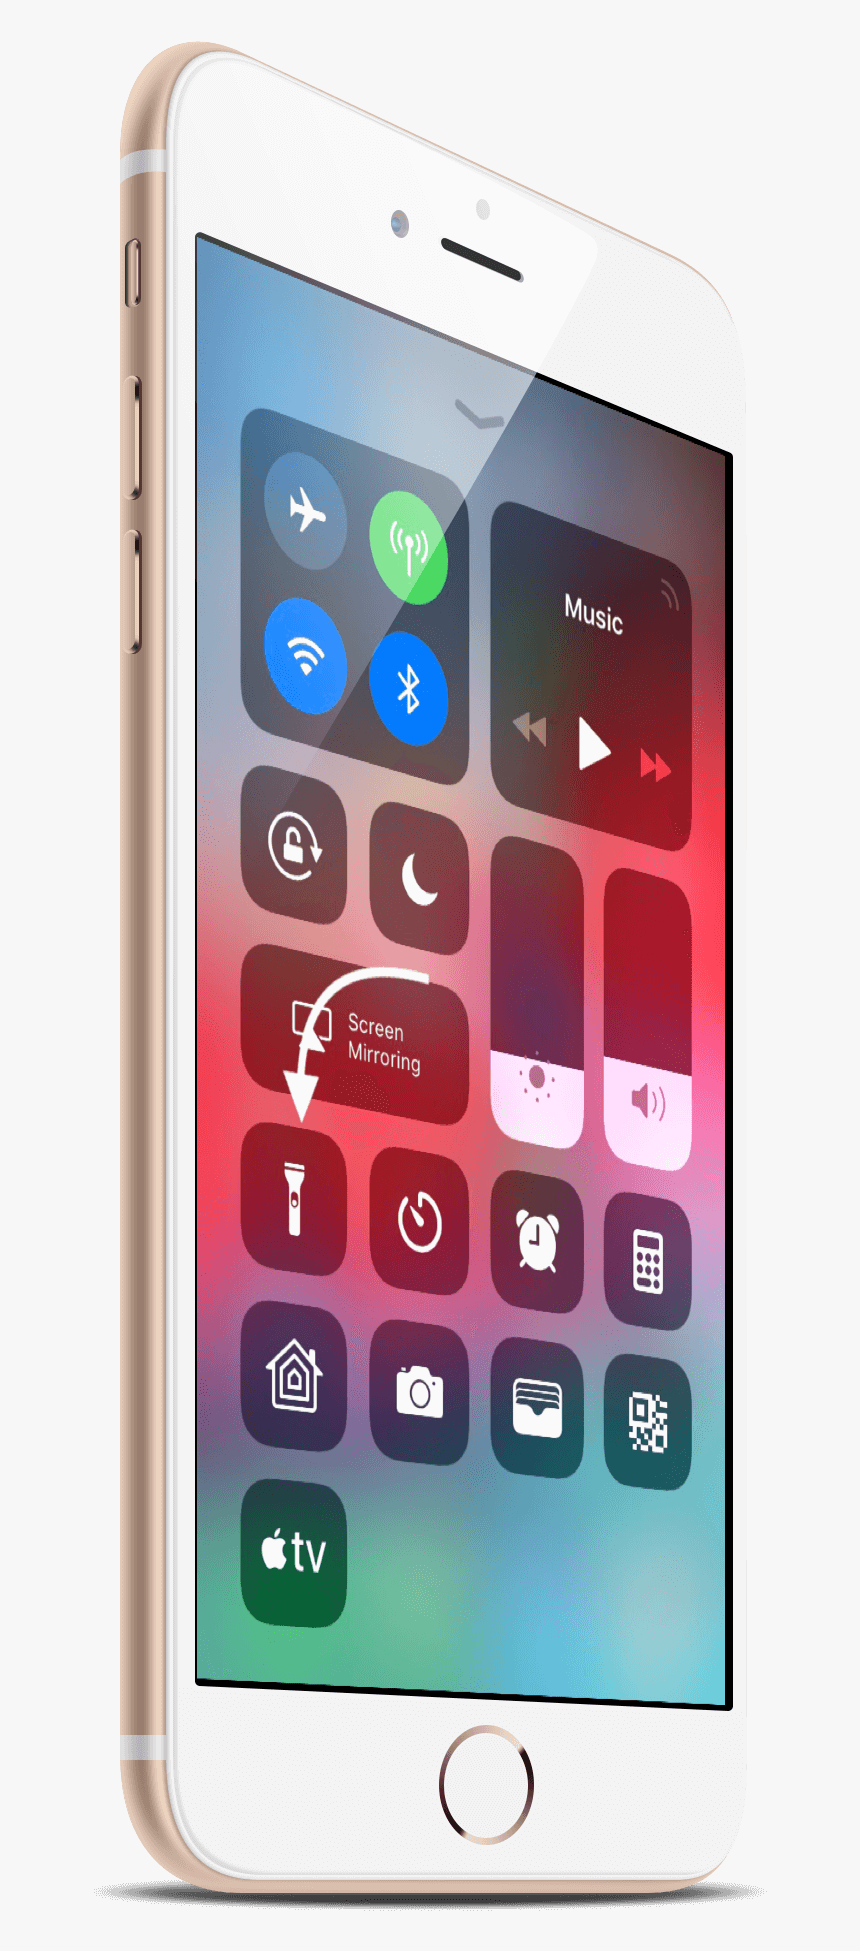 Flashlight Icon In Control Center - Iphone, HD Png Download, Free Download